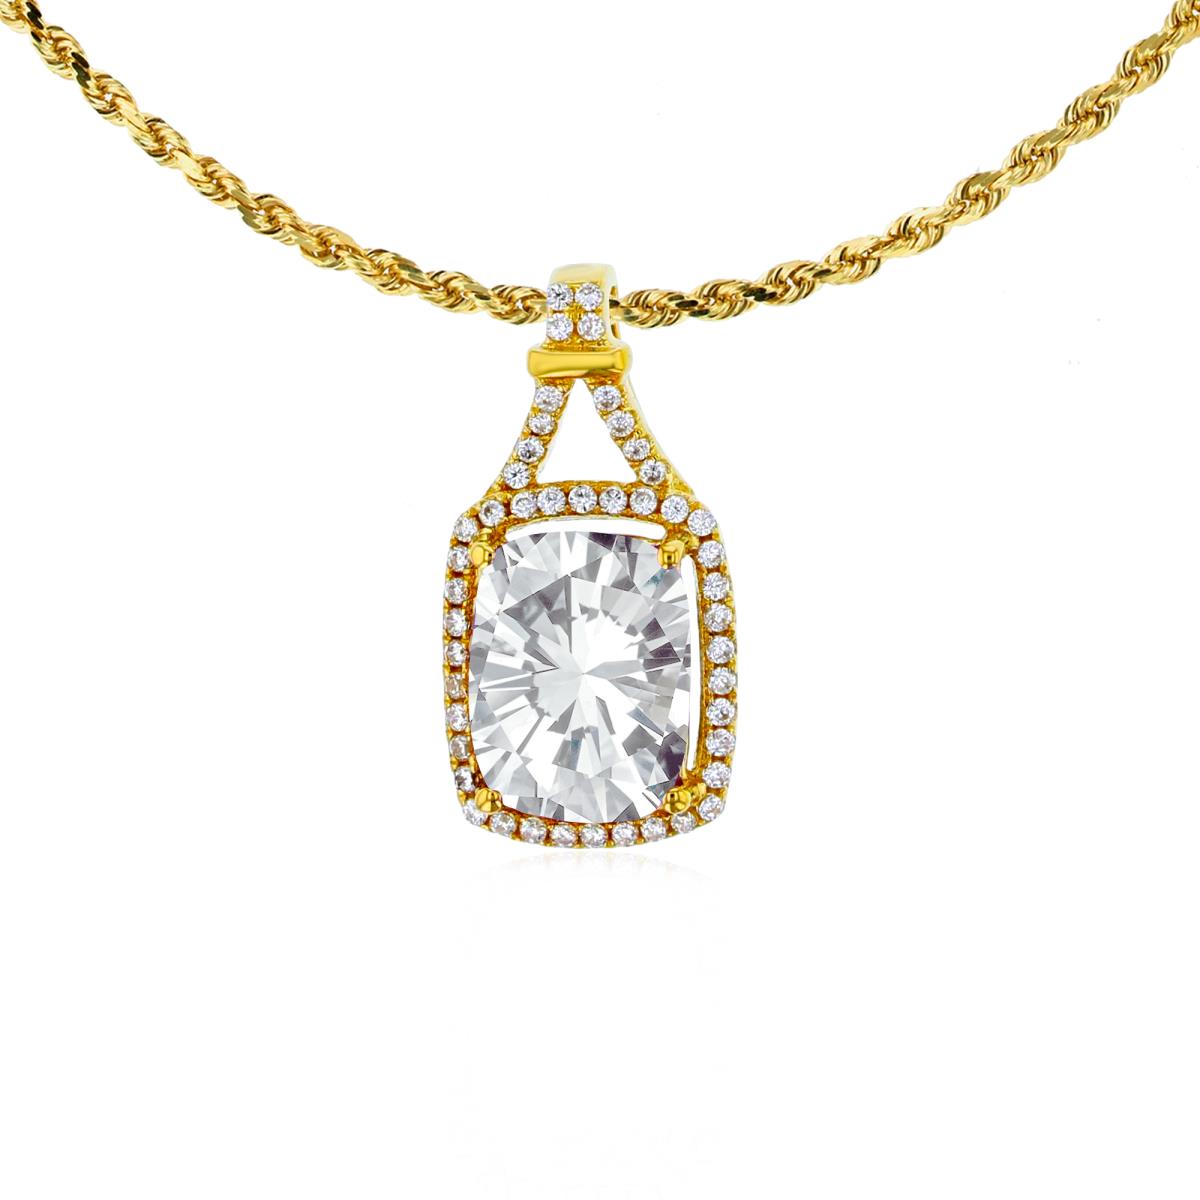 14K Yellow Gold 8x6mm Cushion White Topaz & 0.13 CTTW Rd Diamonds Halo 18" Rope Chain Necklace